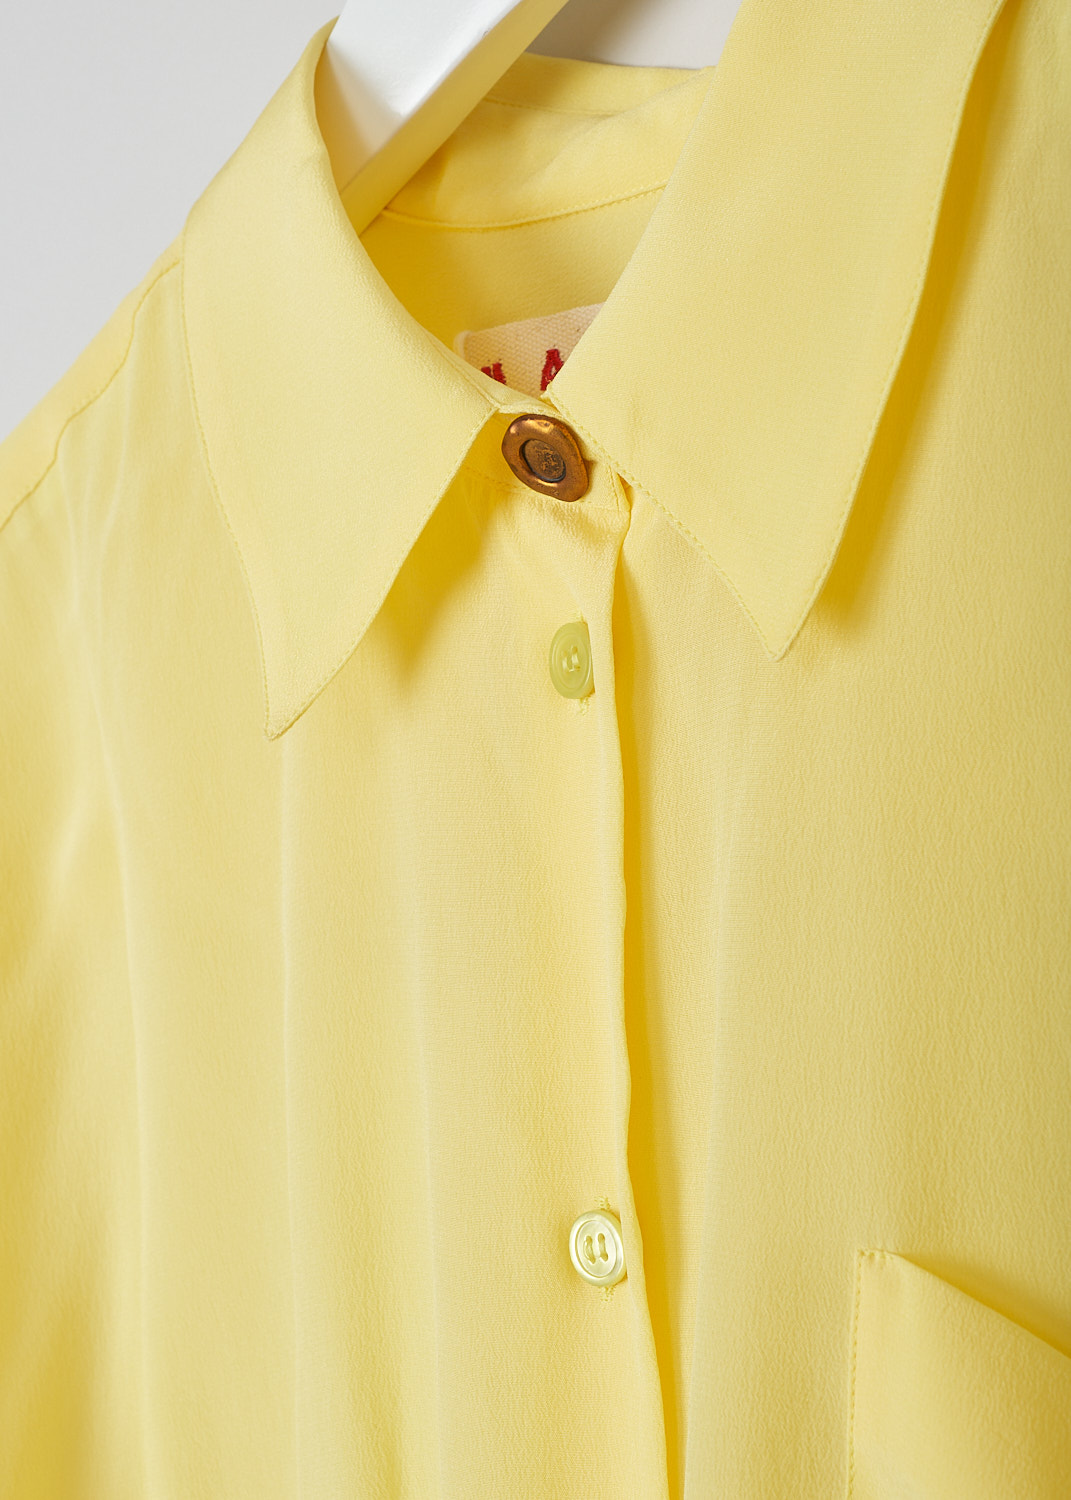 MARNI, LEMON YELLOW SILK CRÊPE DE CHINE BLOUSE, CAMA0526A0_UTSF72_00Y20, Yellow, Detail, This cropped silk crêpe de Chine blouse in lemon yellow has a pointed collar and a front button closure, with a bronze-colored top button. The long sleeves cuffs with those same bronze-colored buttons. In the front, the blouse has a single breast pocket. The hemline has a drawstring. 
  
